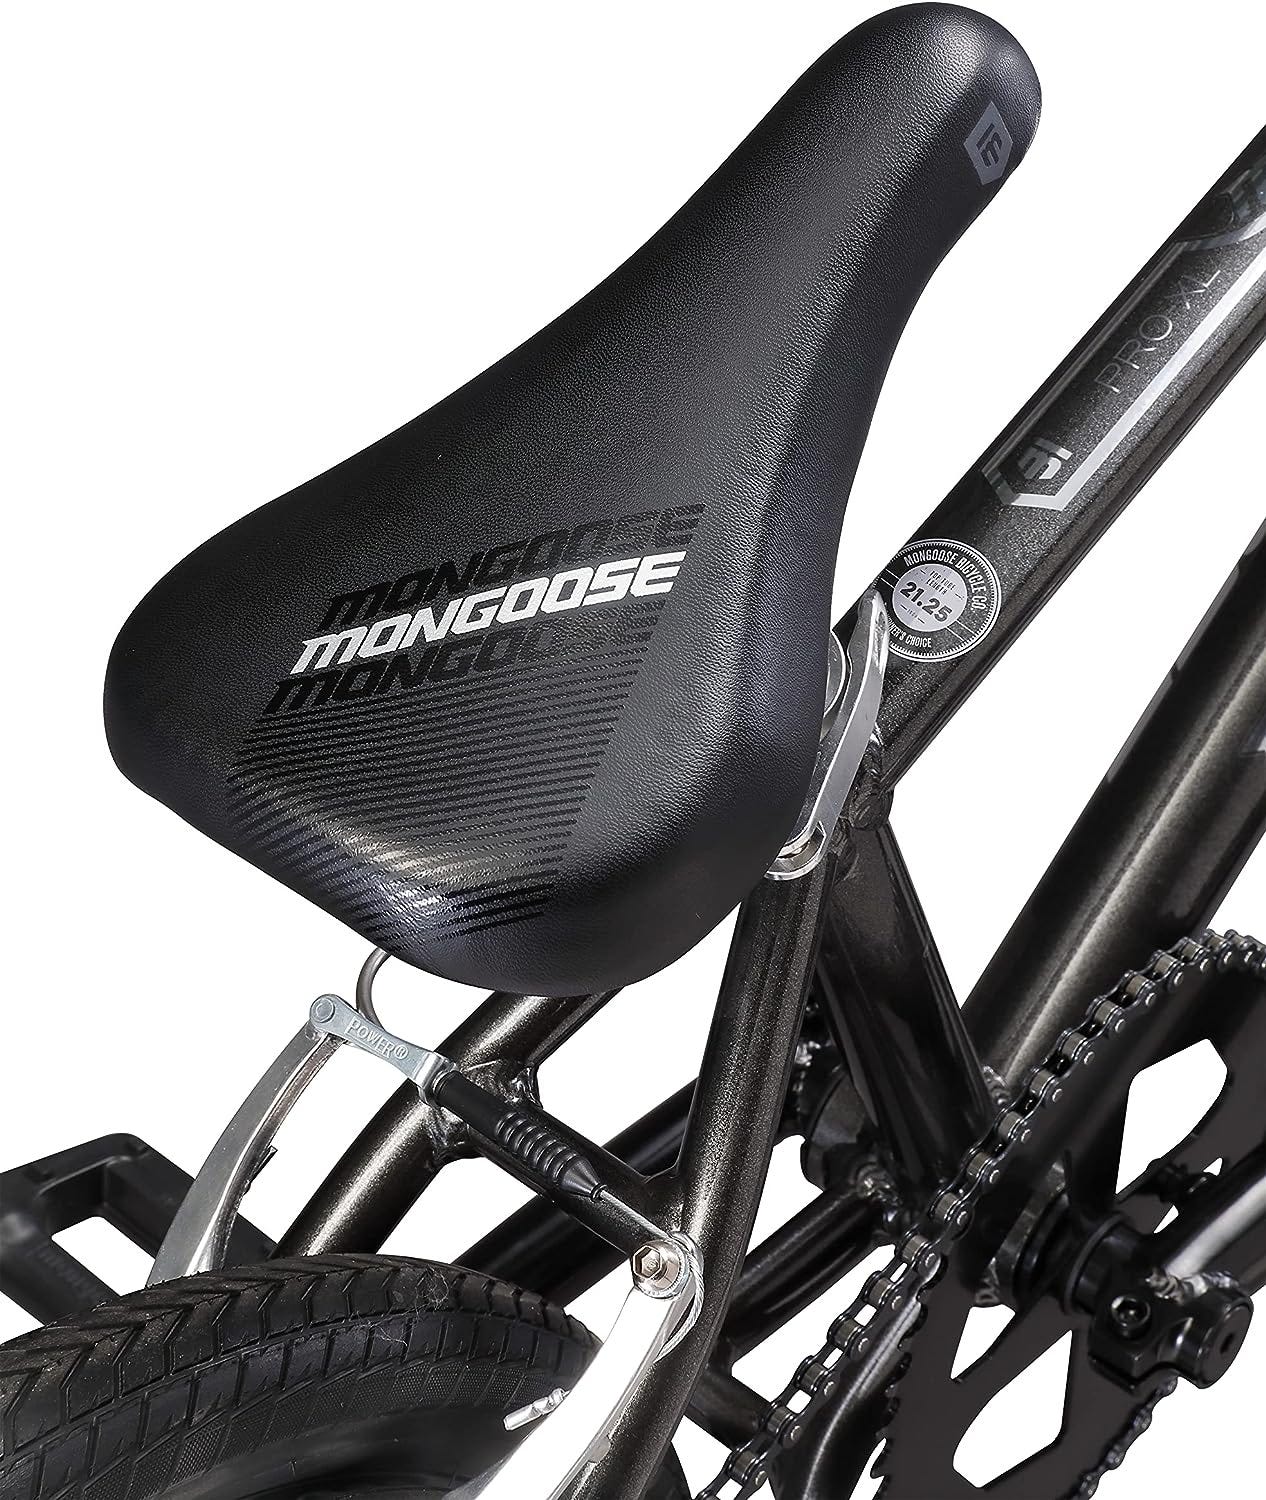 Discovering the World's Most Comfortable Bike Seat